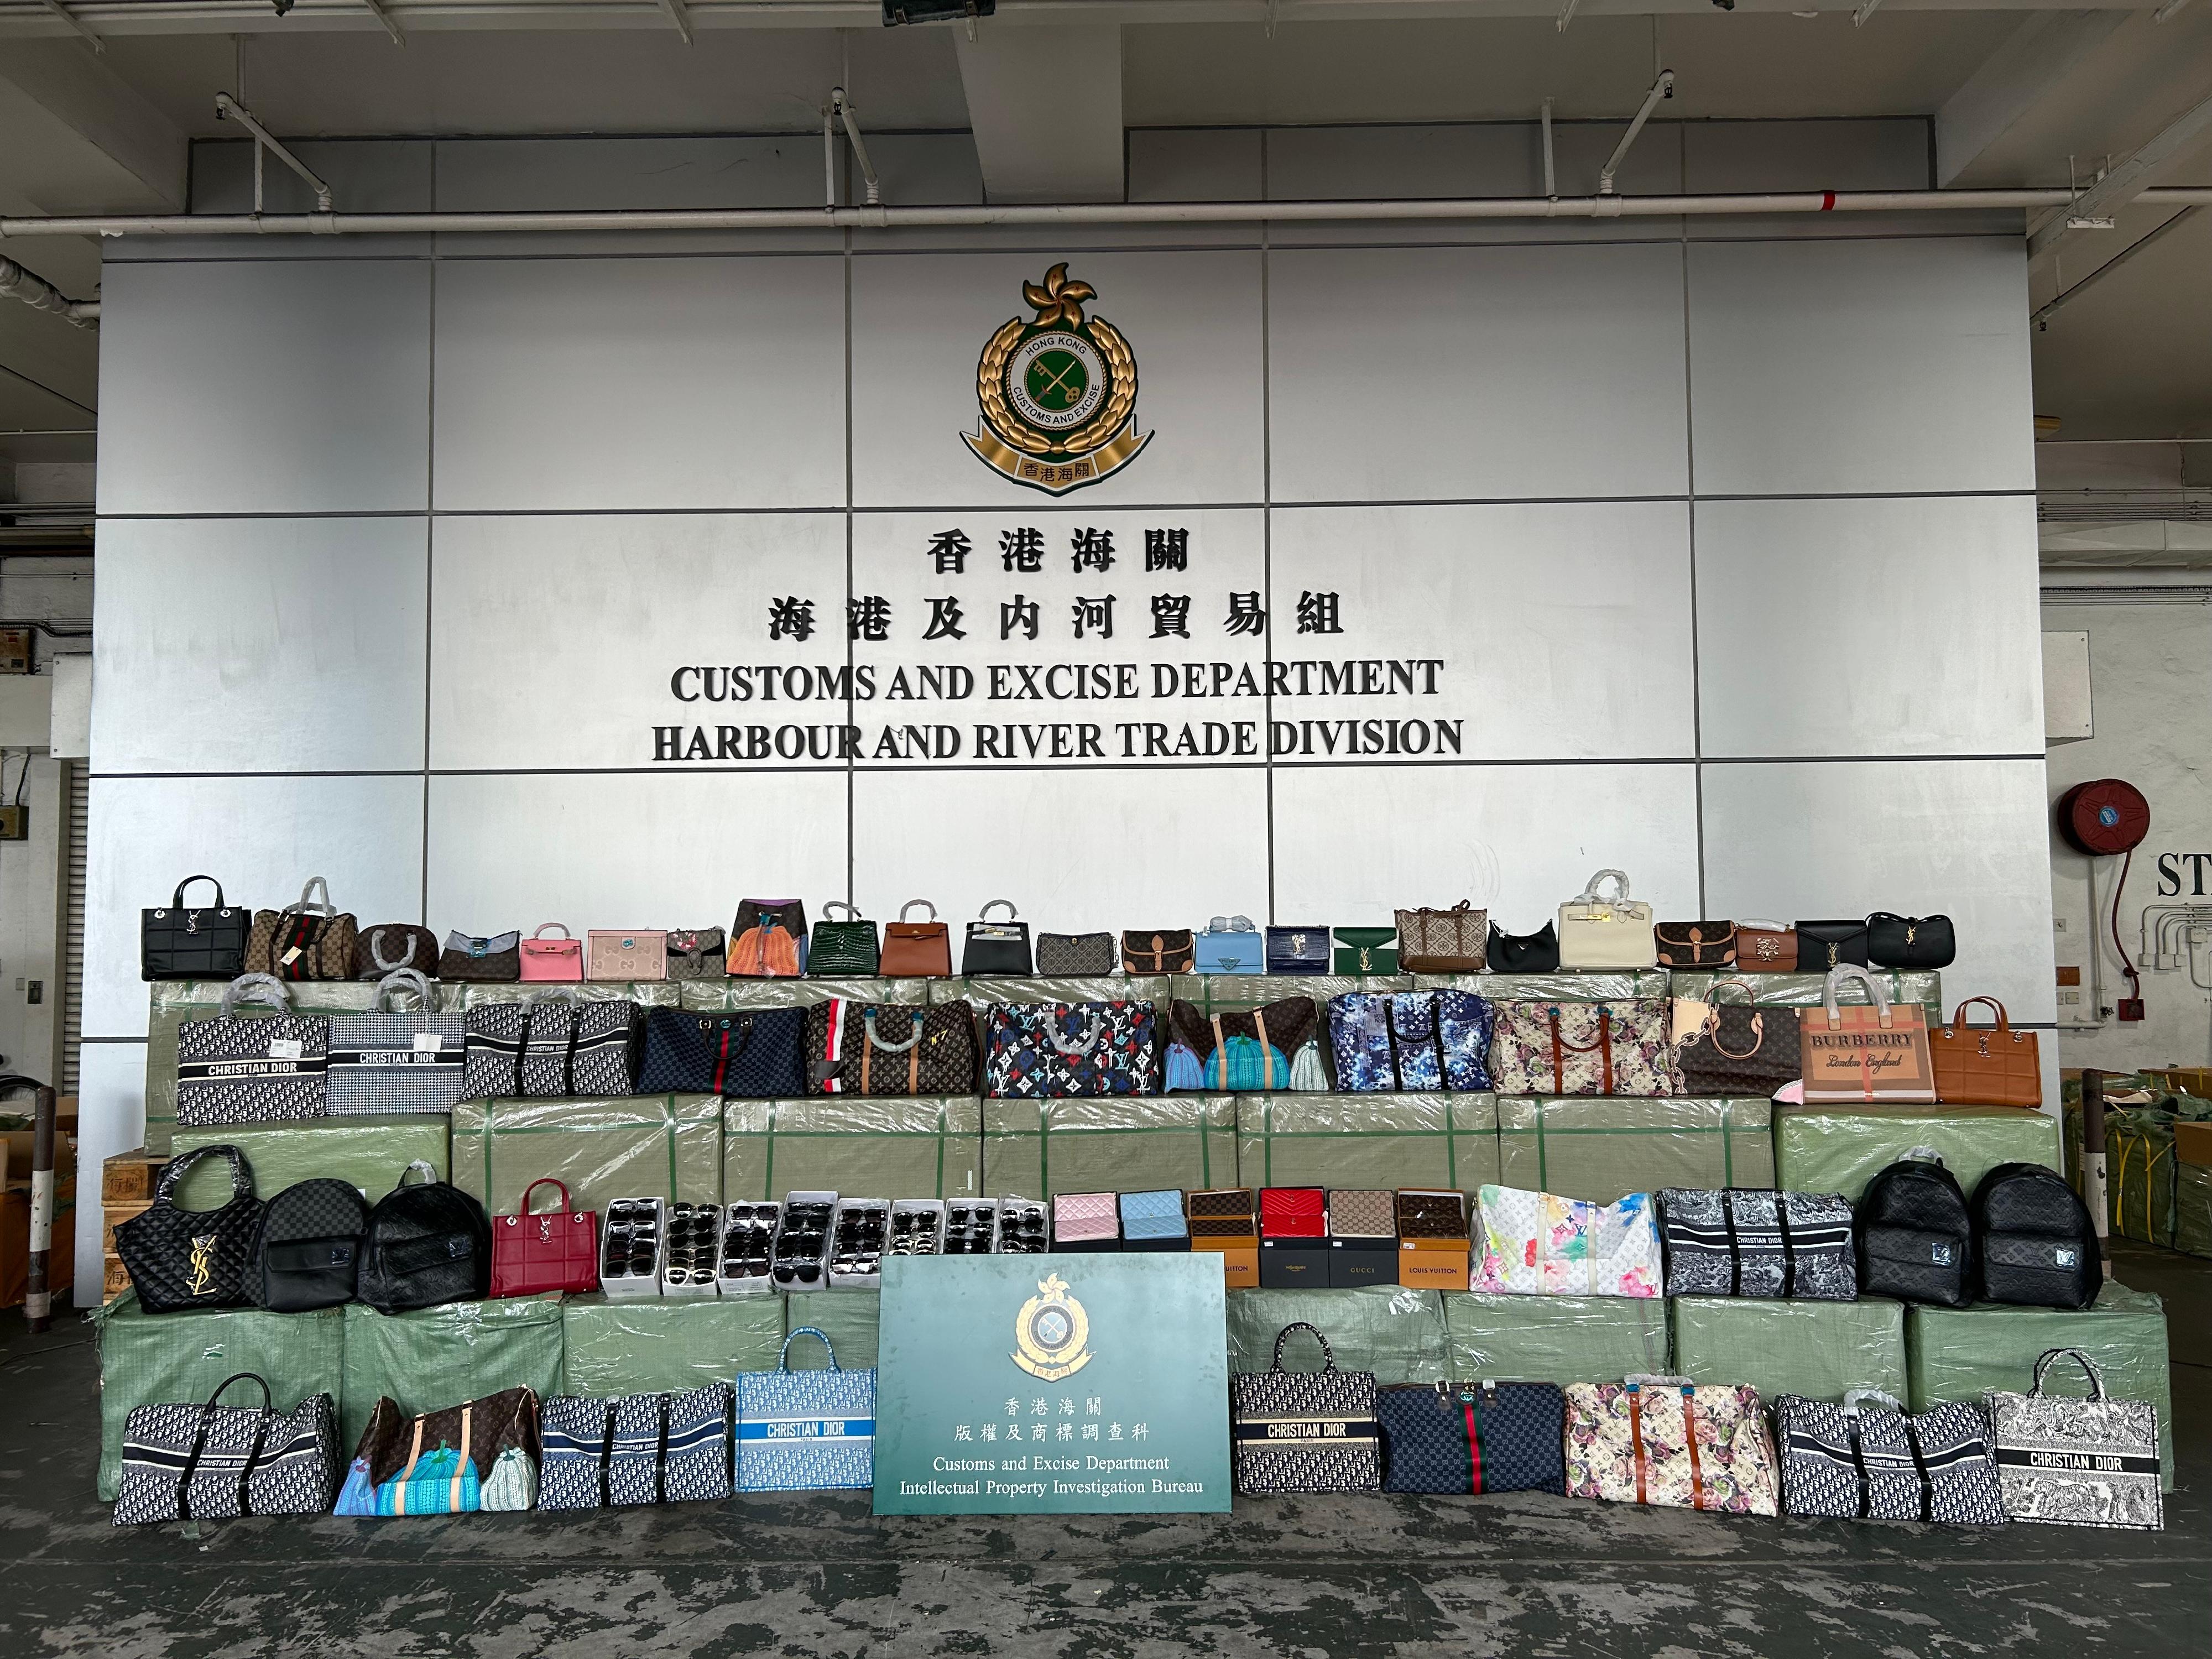 Hong Kong Customs on September 9 seized about 25 000 suspected counterfeit goods, including sunglasses, handbags and wallets, with a total estimated market value of about $6 million, at the Kwai Chung Container Terminals. Photo shows some of the suspected counterfeit goods seized.